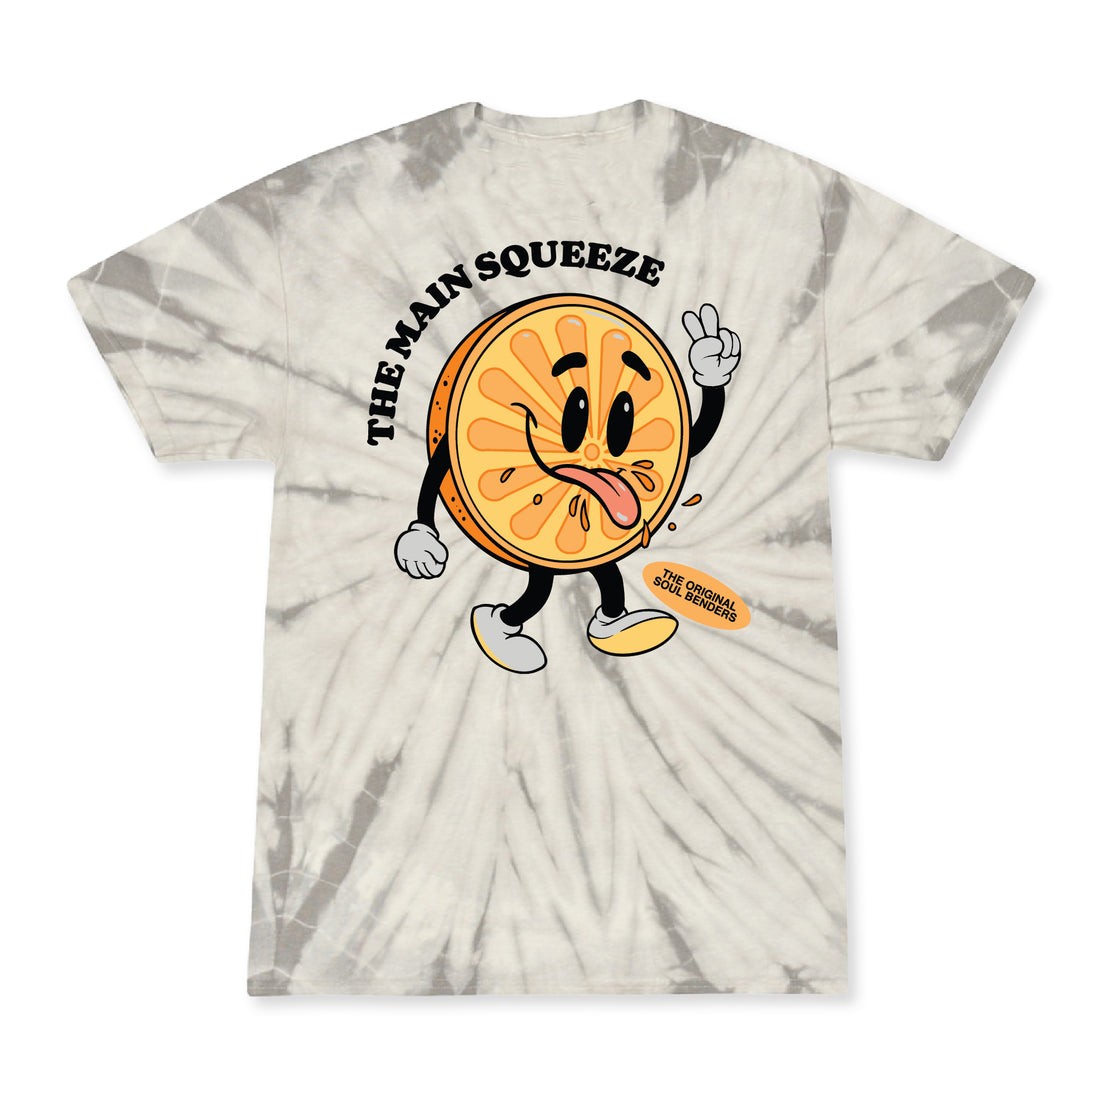 The Main Squeeze - Self Titled - 10 Year Anniversary Double Vinyl + Zesty Tie Dye Tee Bundle